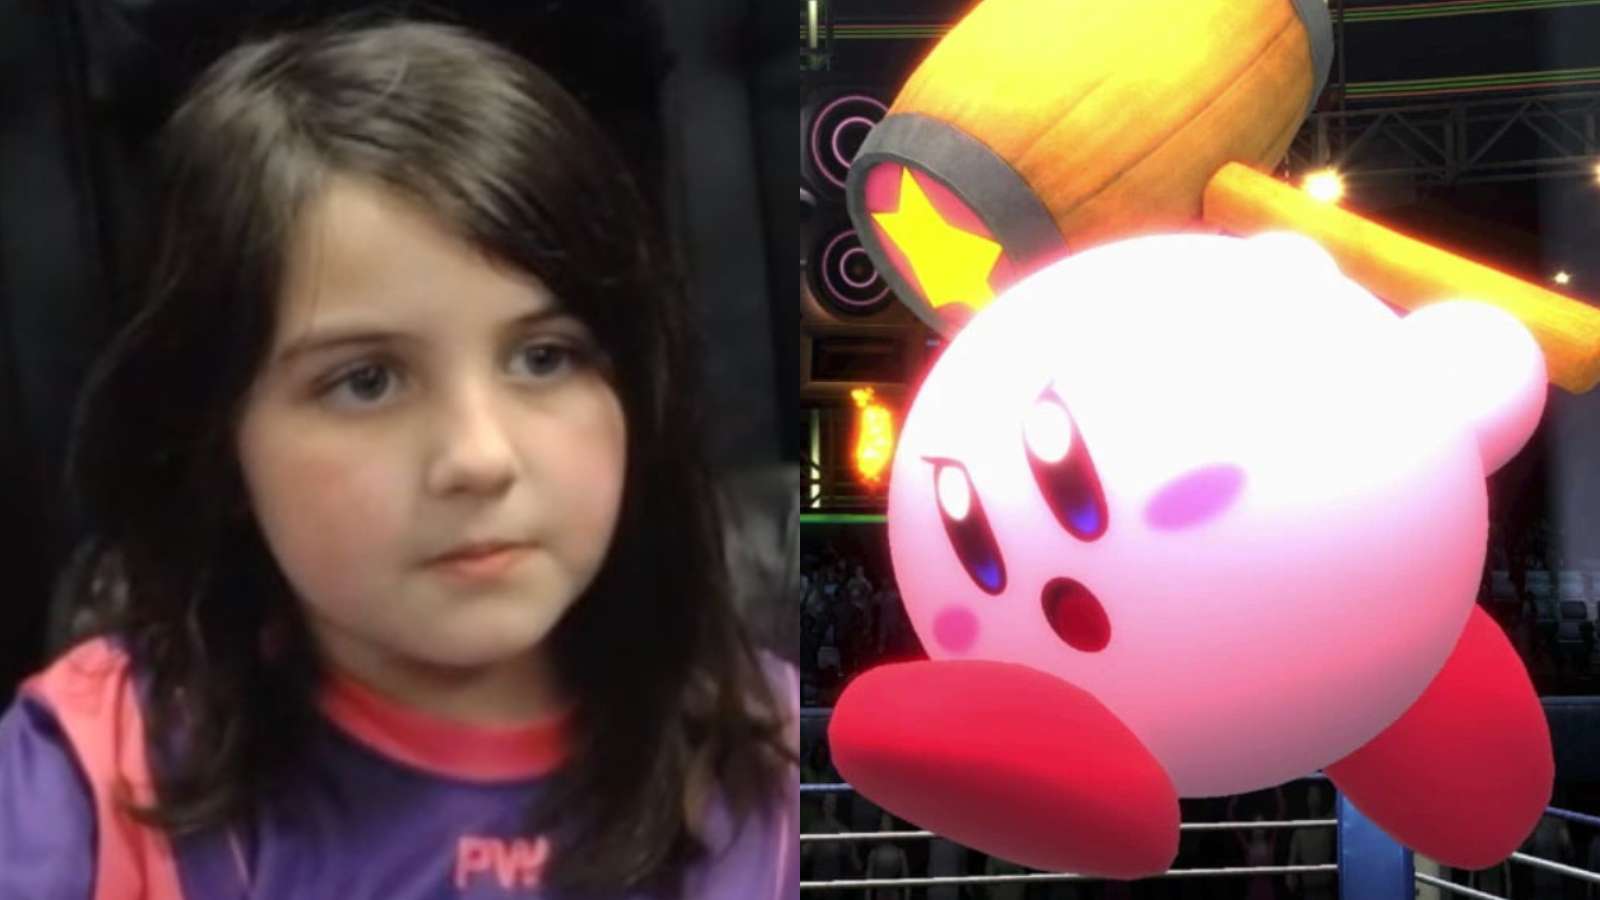 8-year-old girl bubblegum wins games at smash tournament